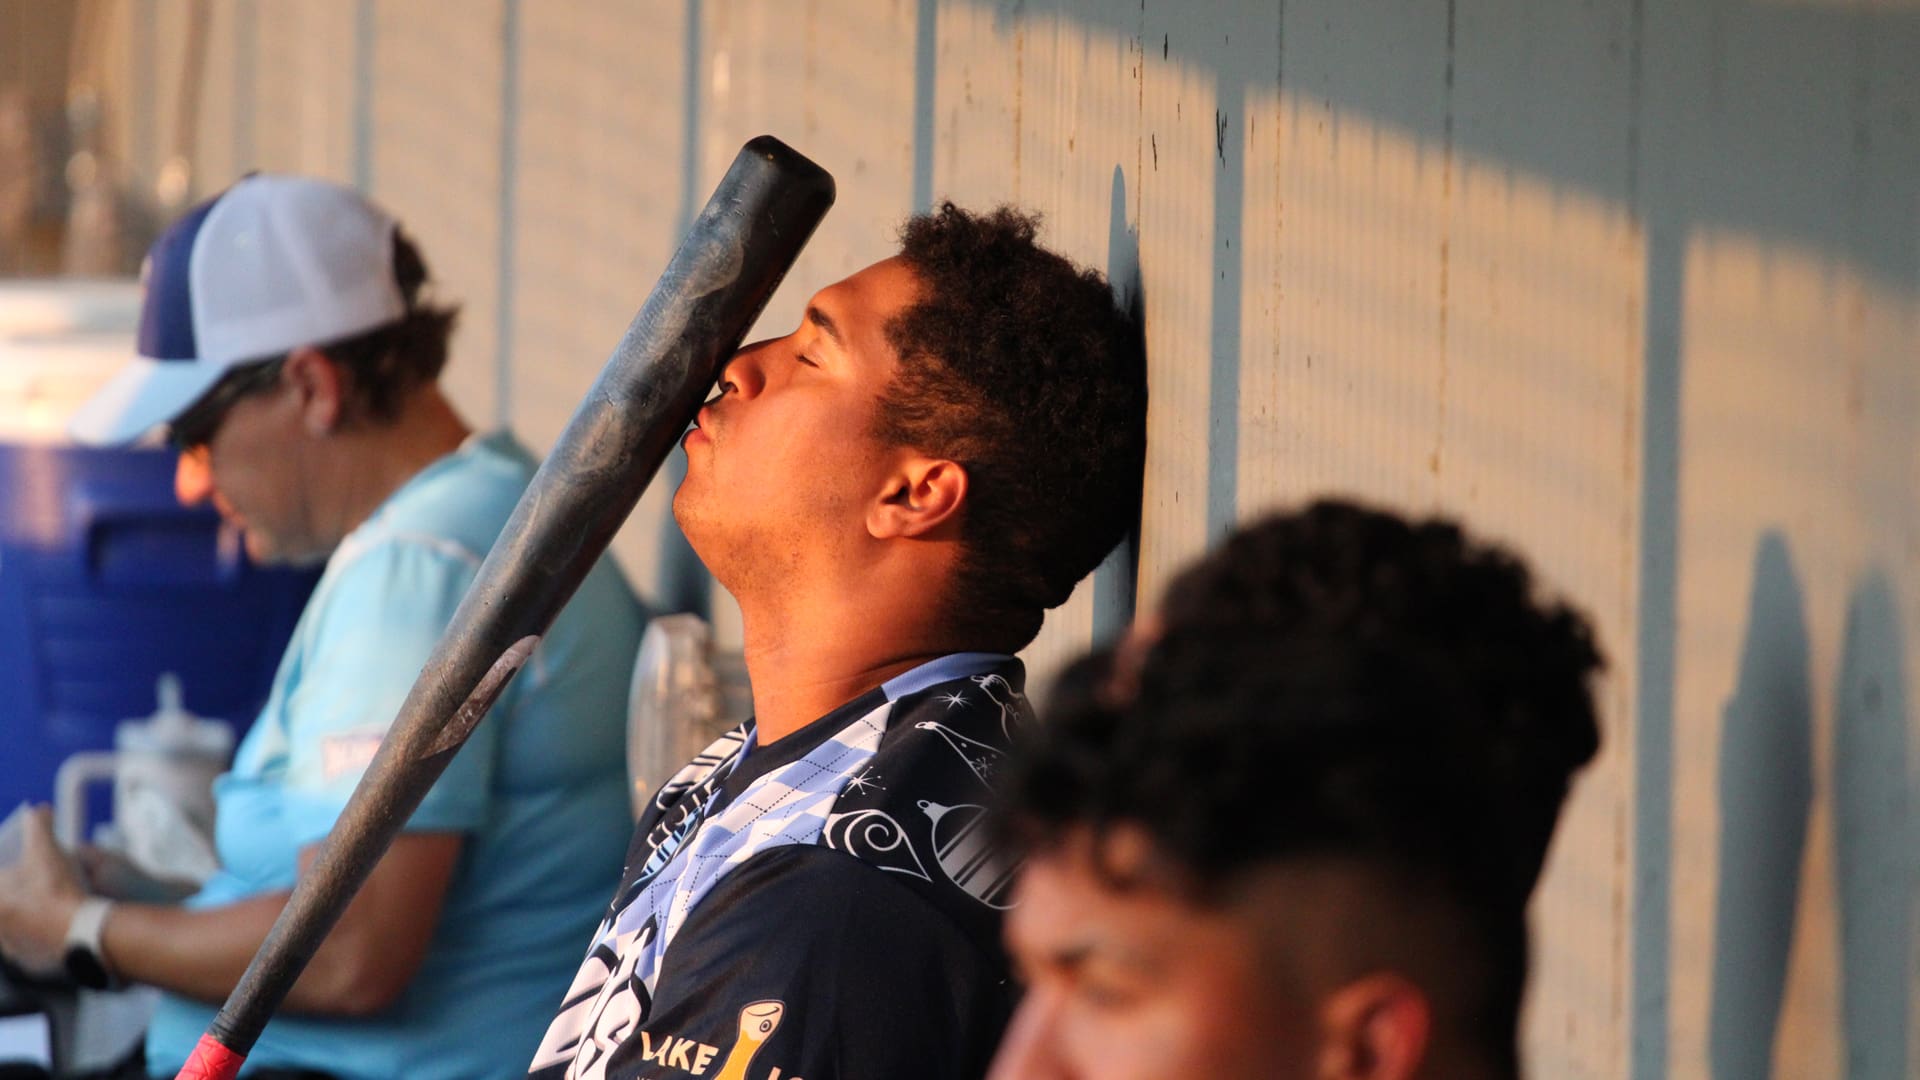 Ryan Hernandez searches for hits in his bat while sitting in the dugout.